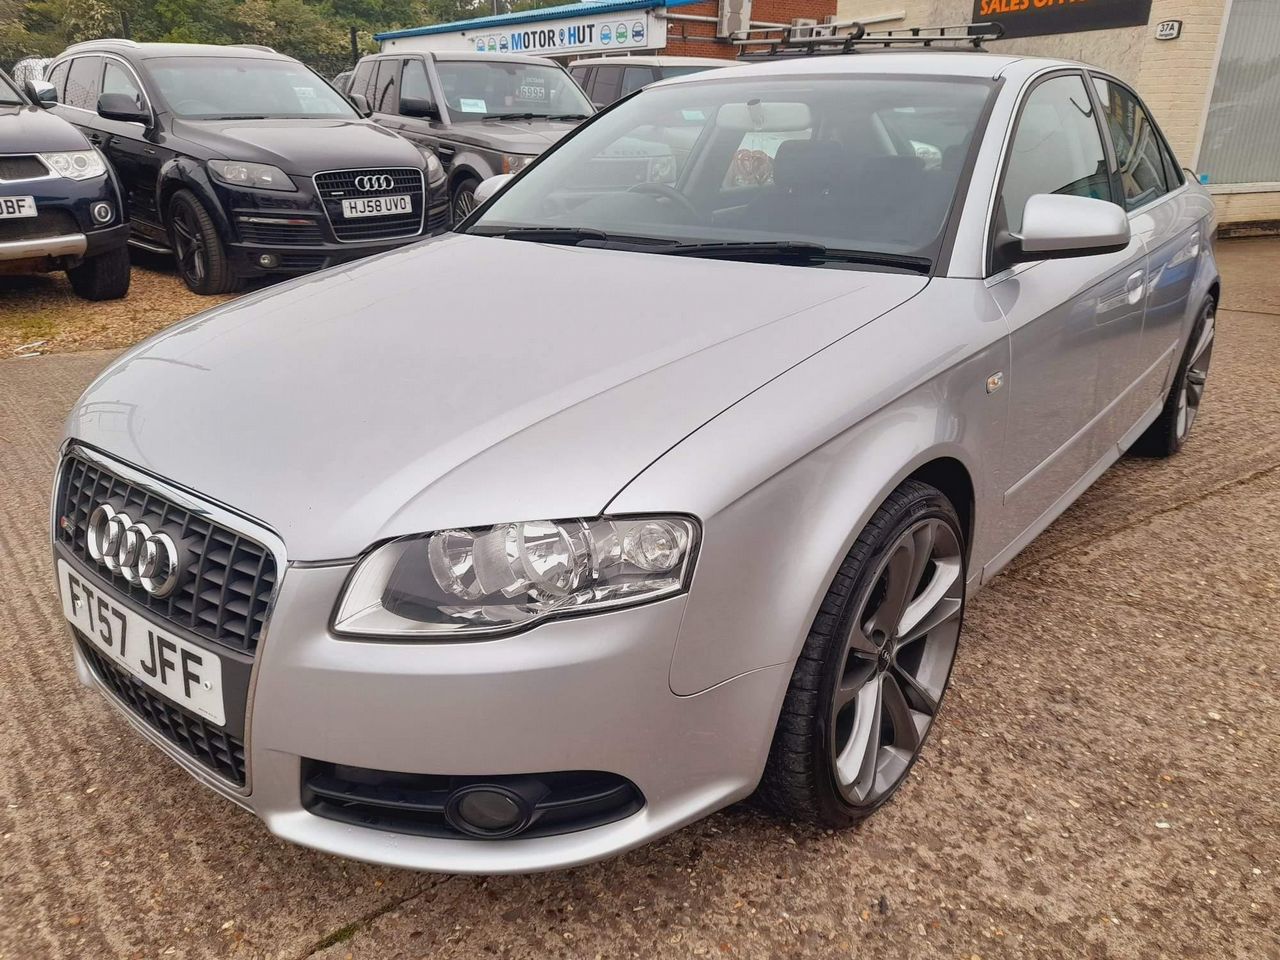 2008 Audi A4 2.0 TDI S line CVT 4dr - Picture 9 of 50